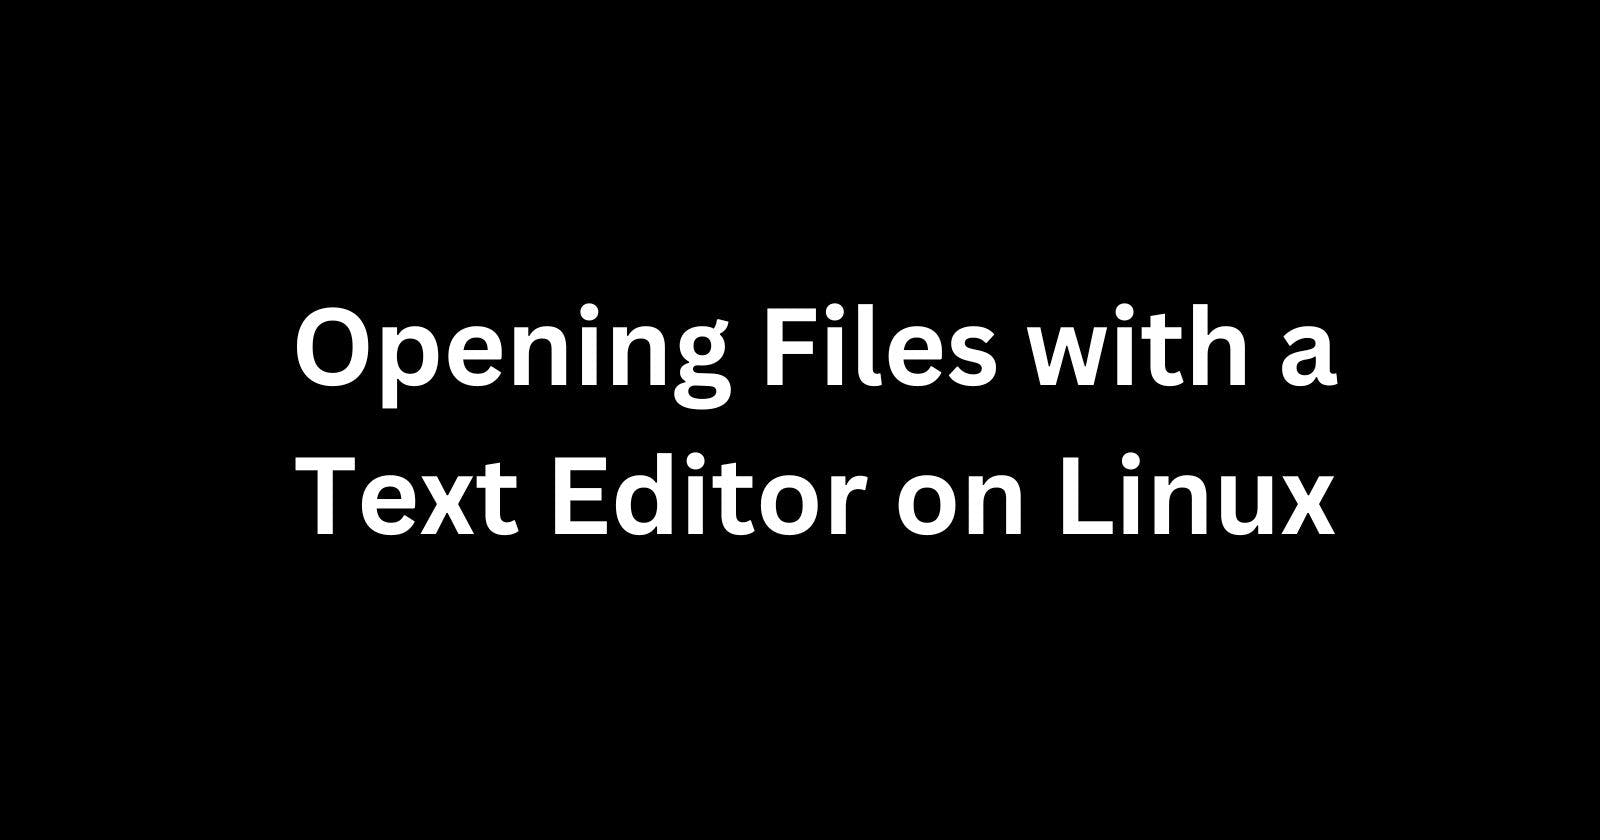 Opening Files with a Text Editor on Linux